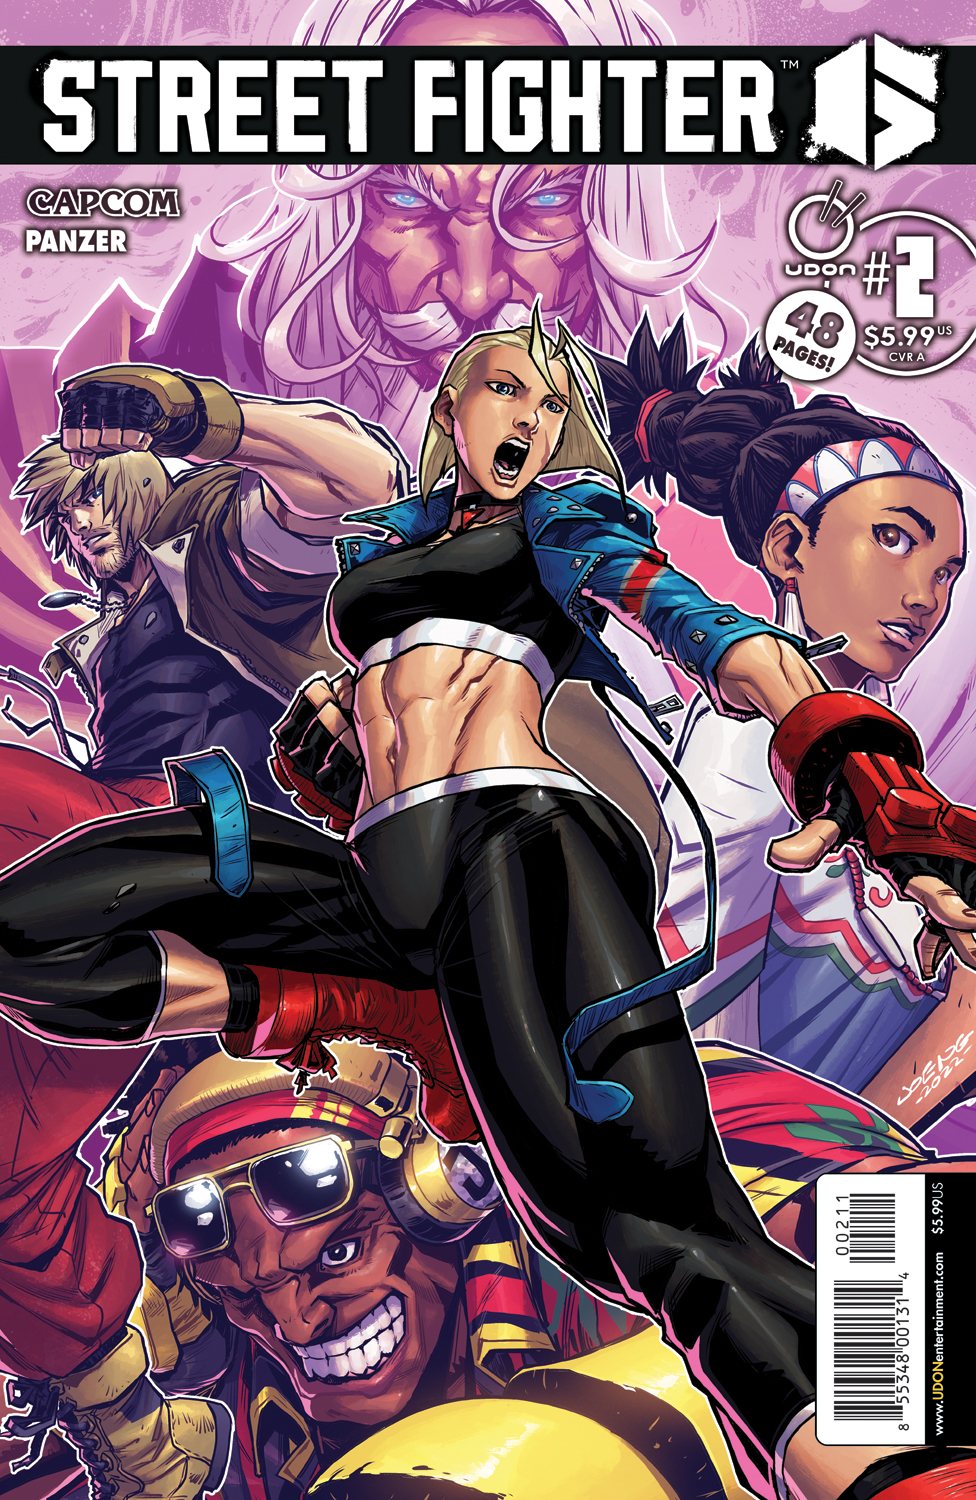 Street Fighter 6 #2 Cover A Ng (Of 4)